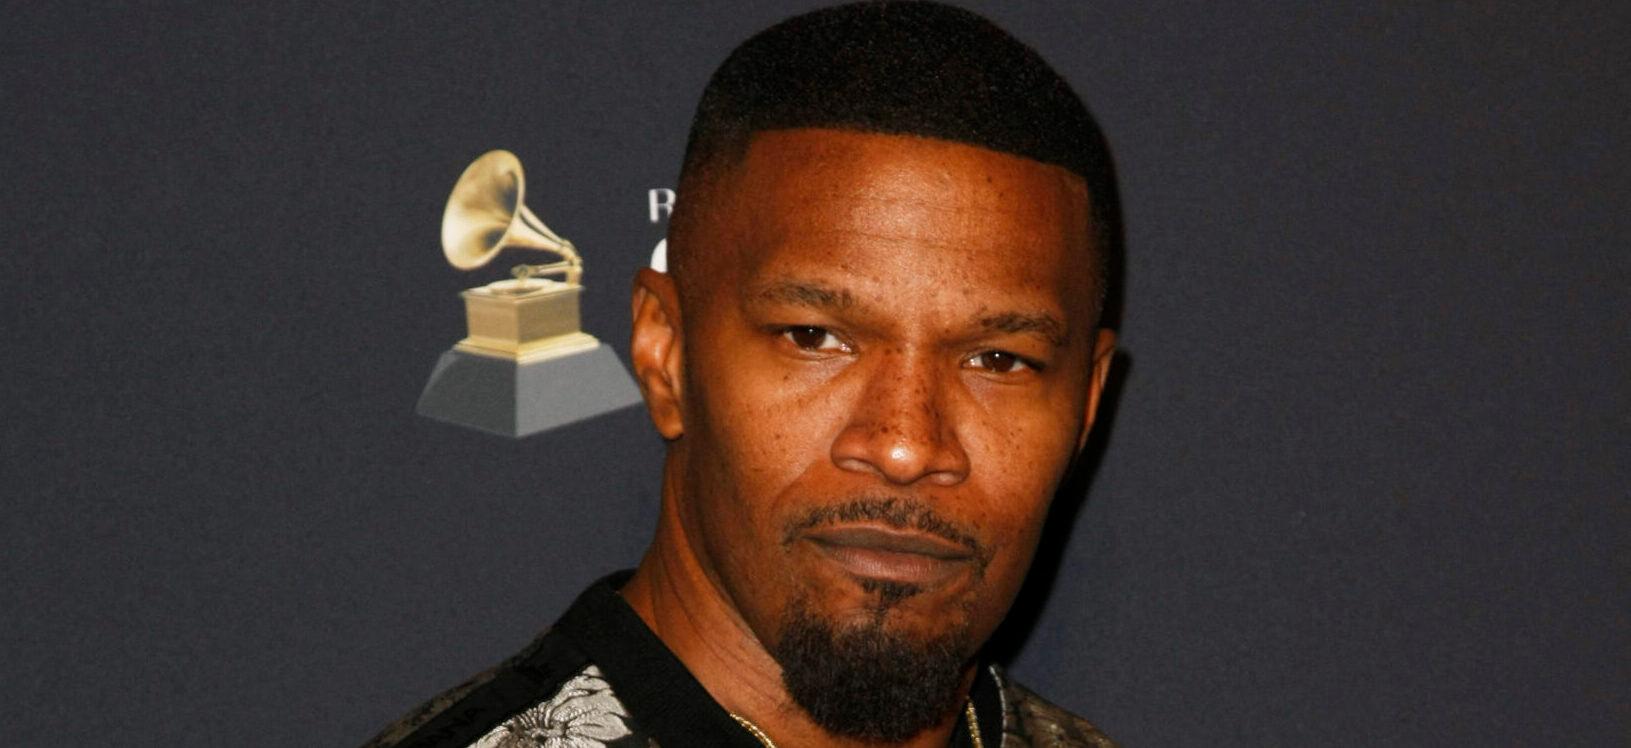 Fans Are Eager For Update On Jamie Foxx’s Health As Daughter Drops New Post